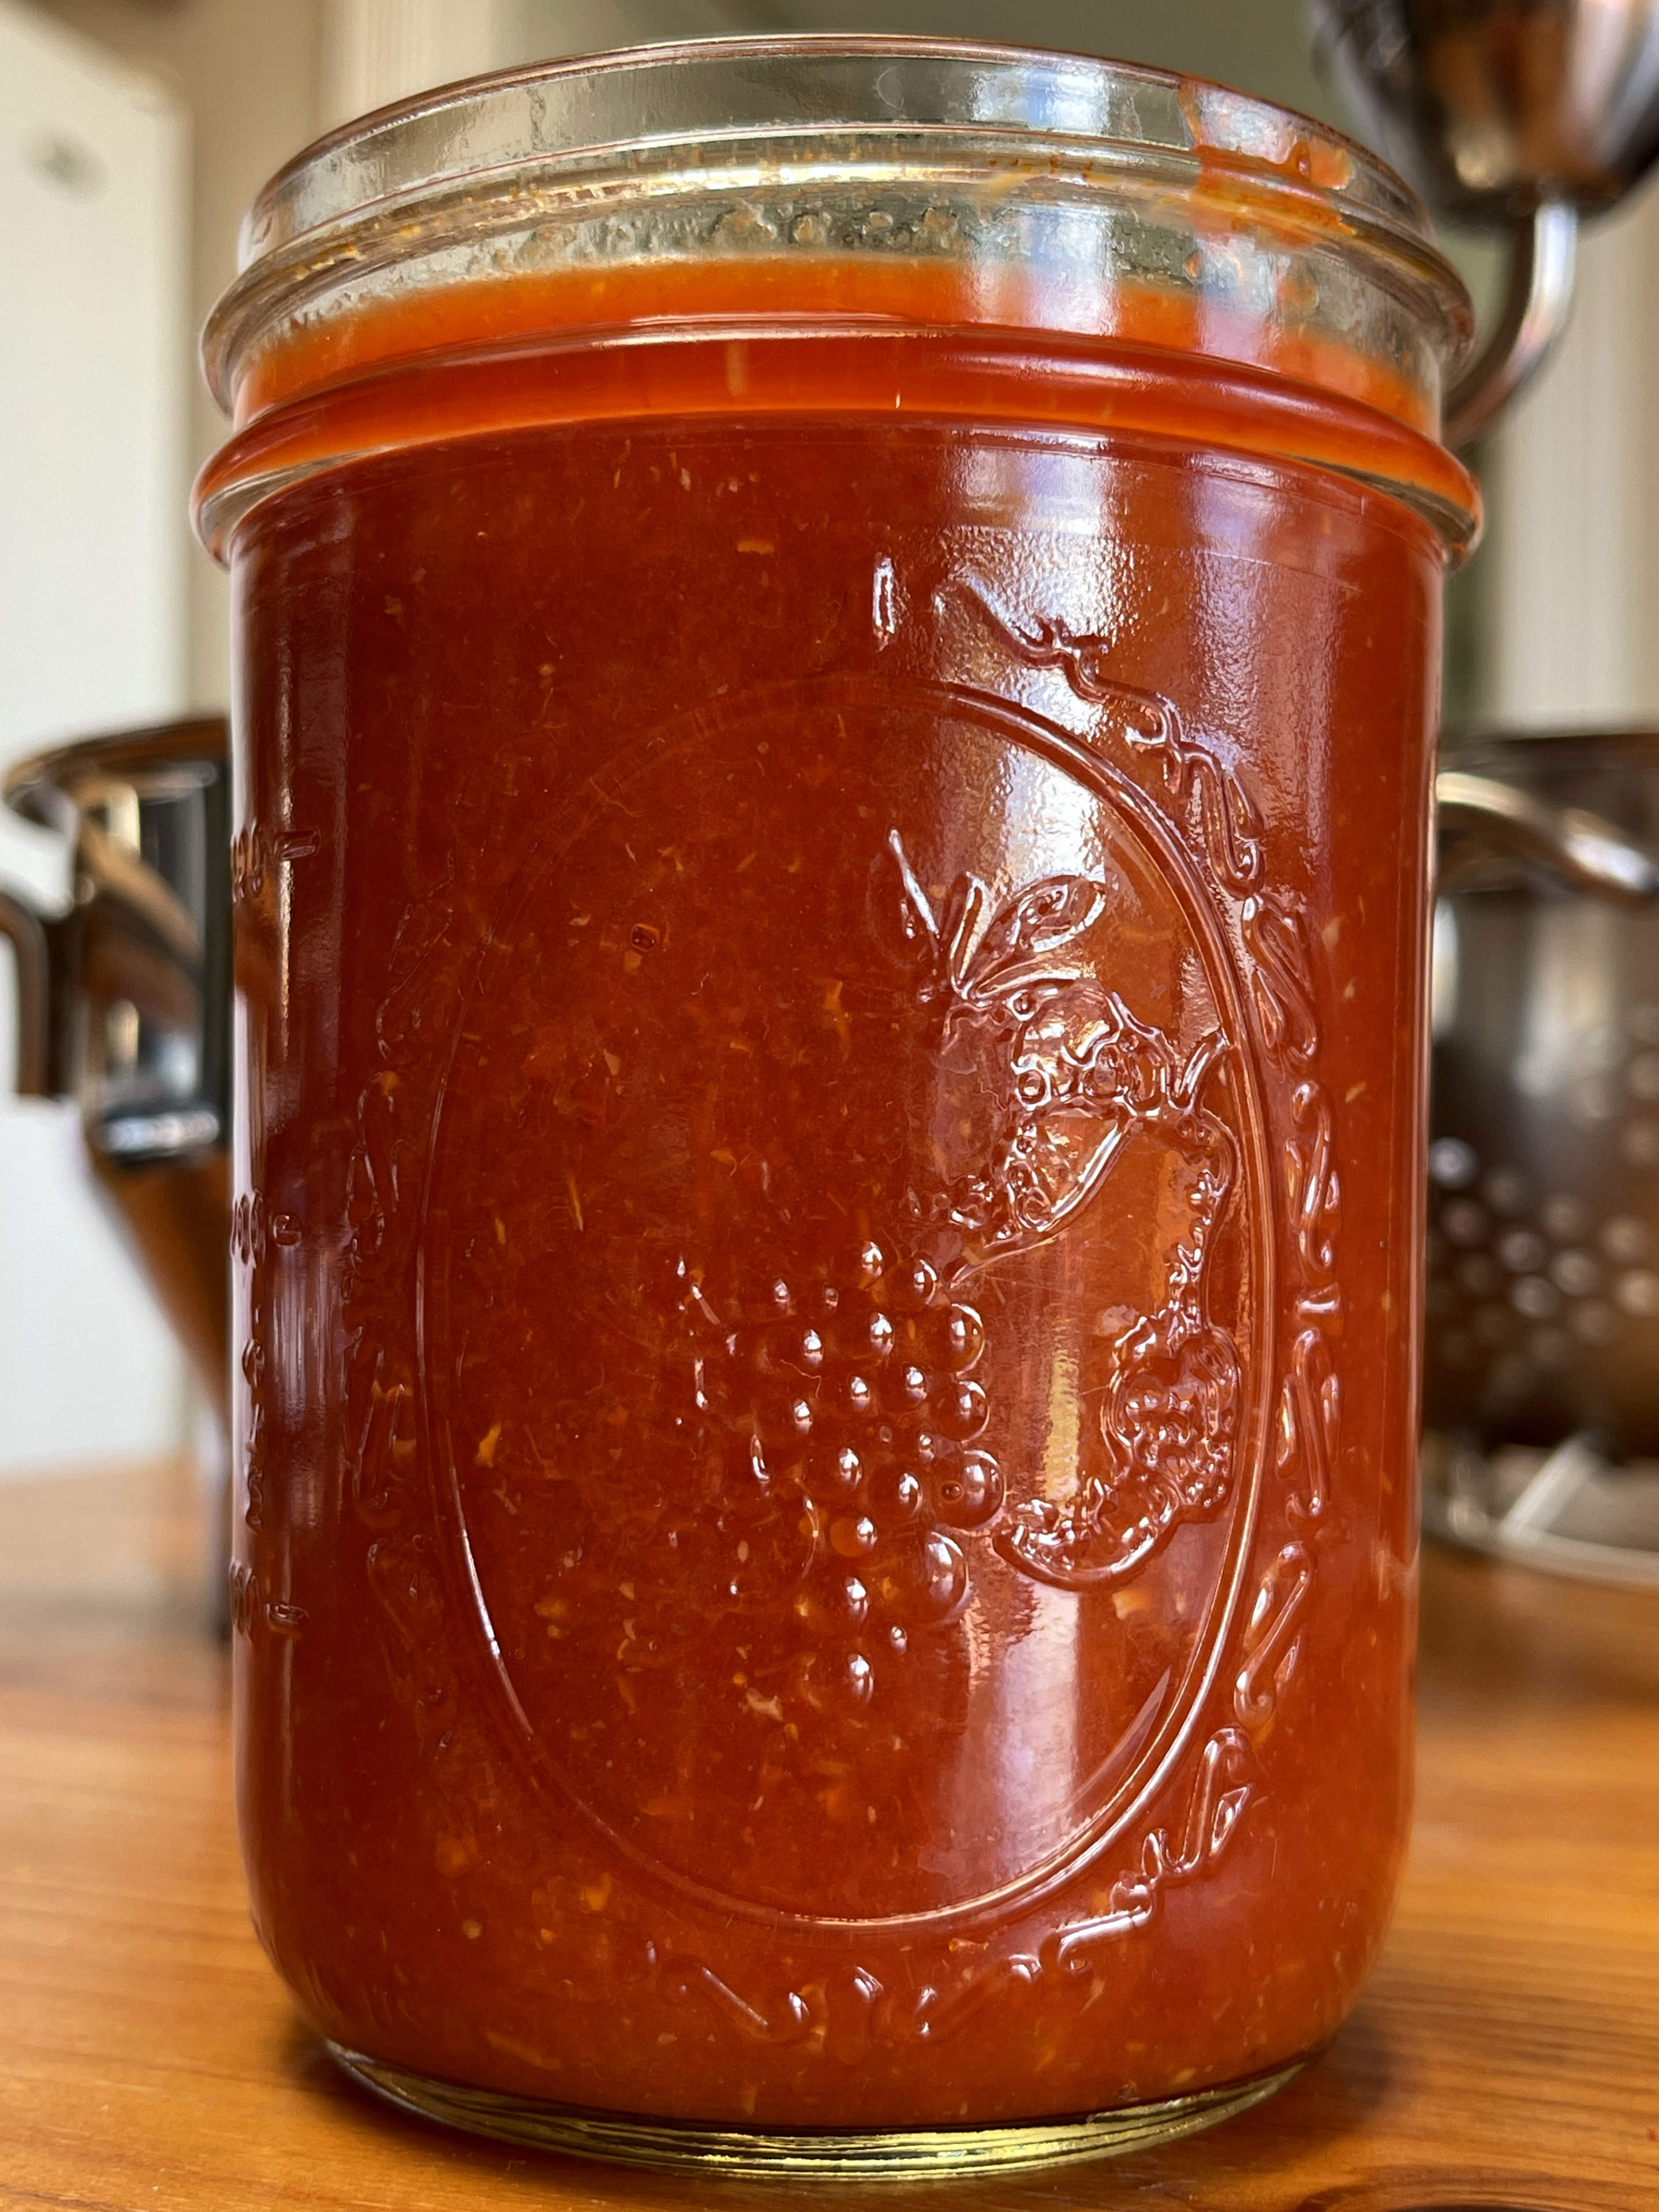 A mason jar is filled with homemade tomato purée. The jars sits on a wooden table.